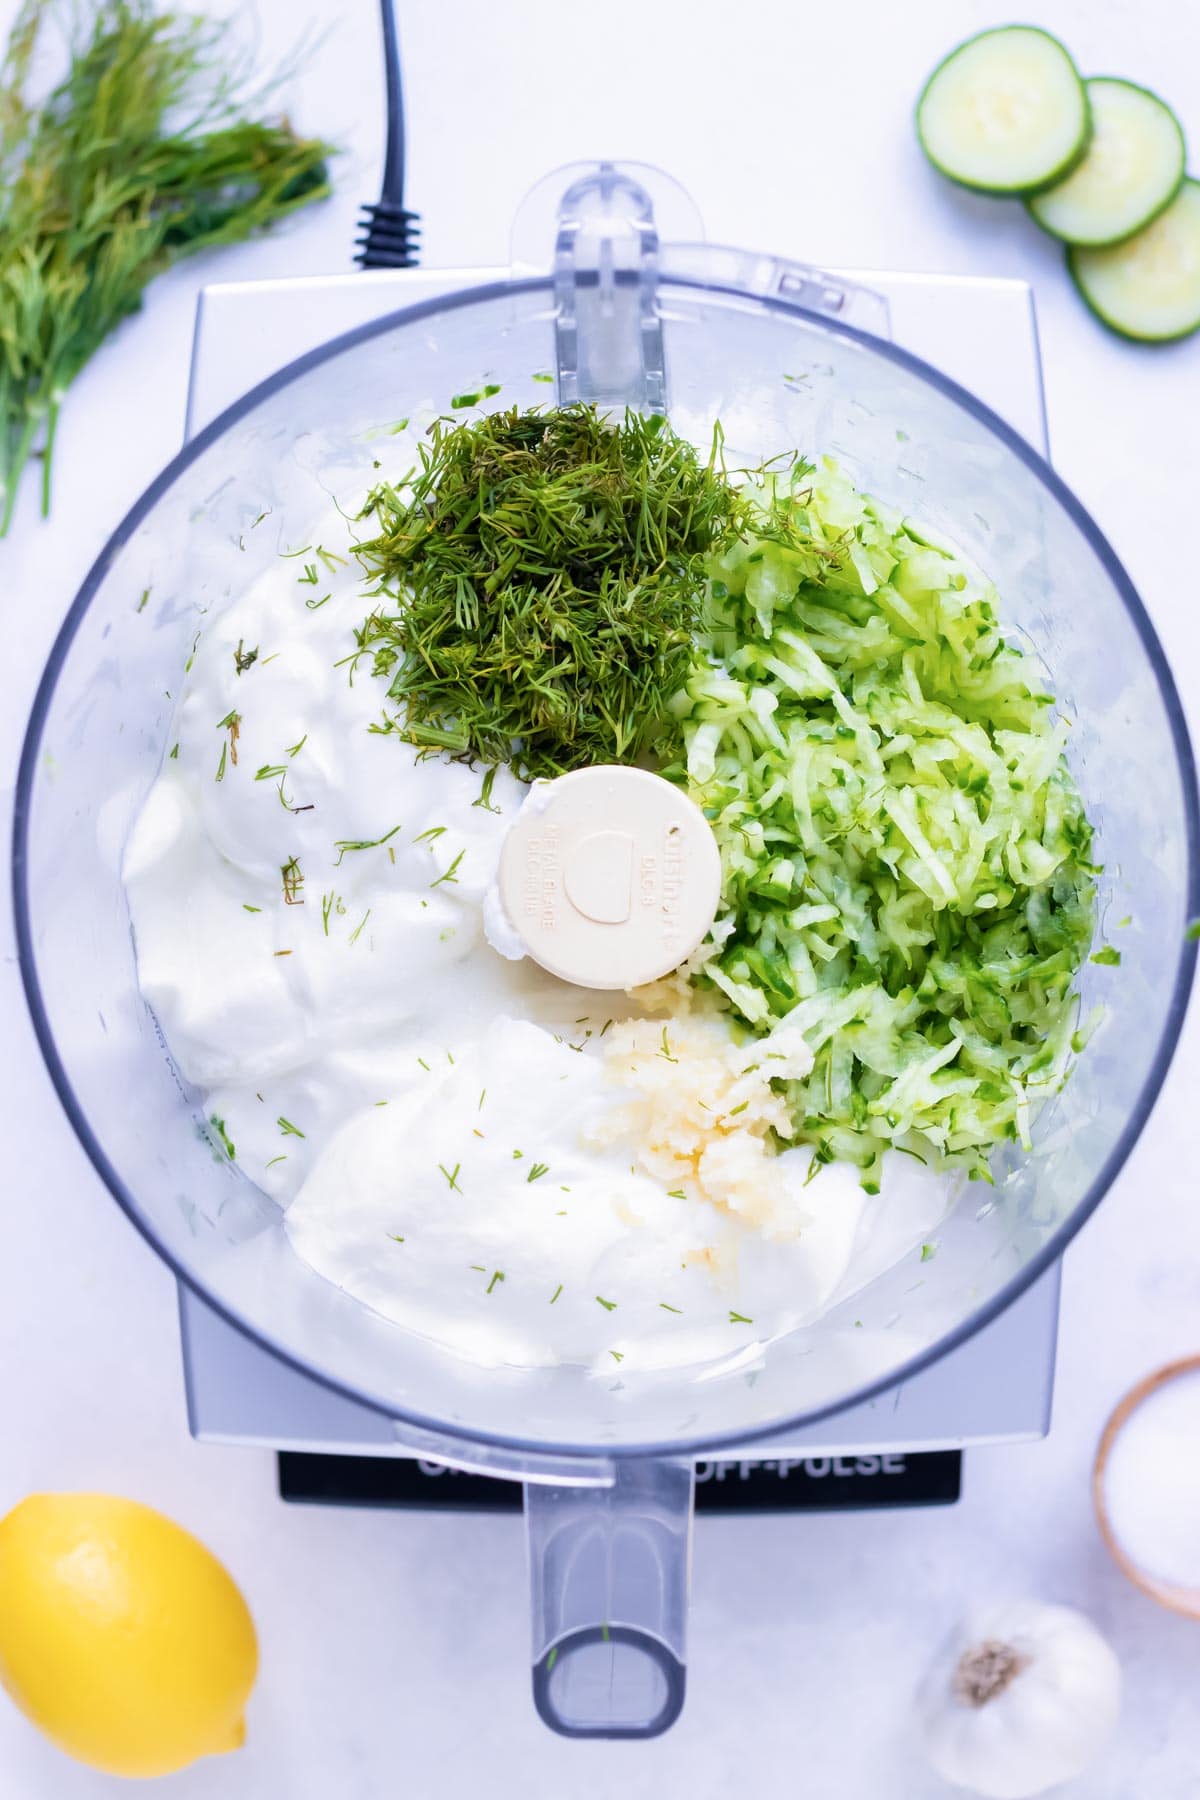 Learn how to make tzatziki sauce in a food processor by combining Greek yogurt, fresh dill, shredded cucumber, and other ingredients for an authentic Mediterranean dip.